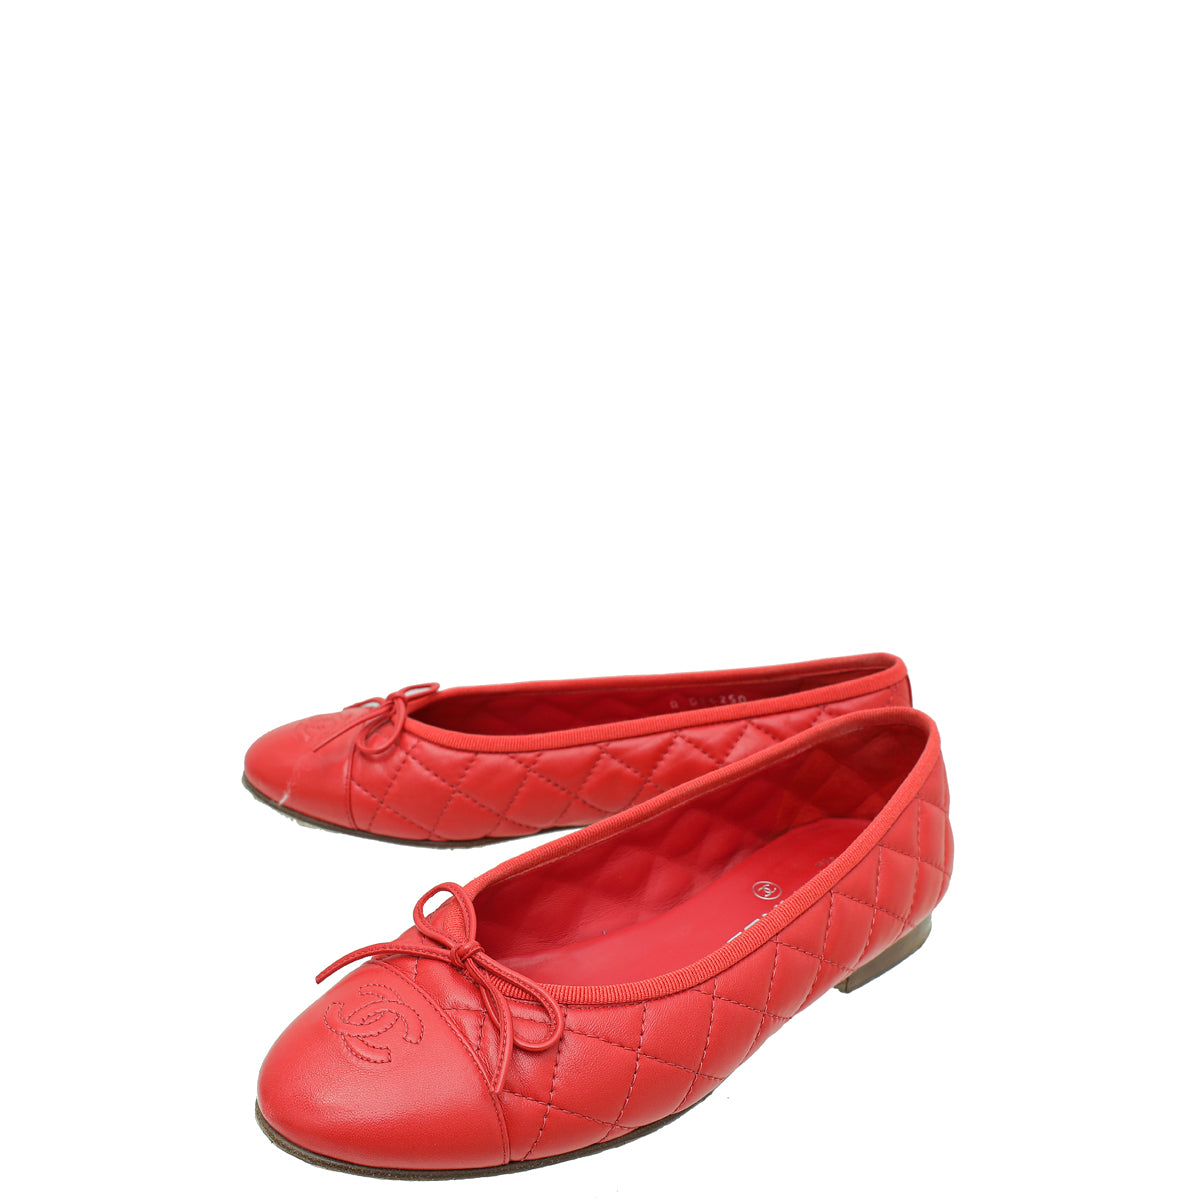 Chanel Red CC Cap Toe Quilted Flat Ballerina 38